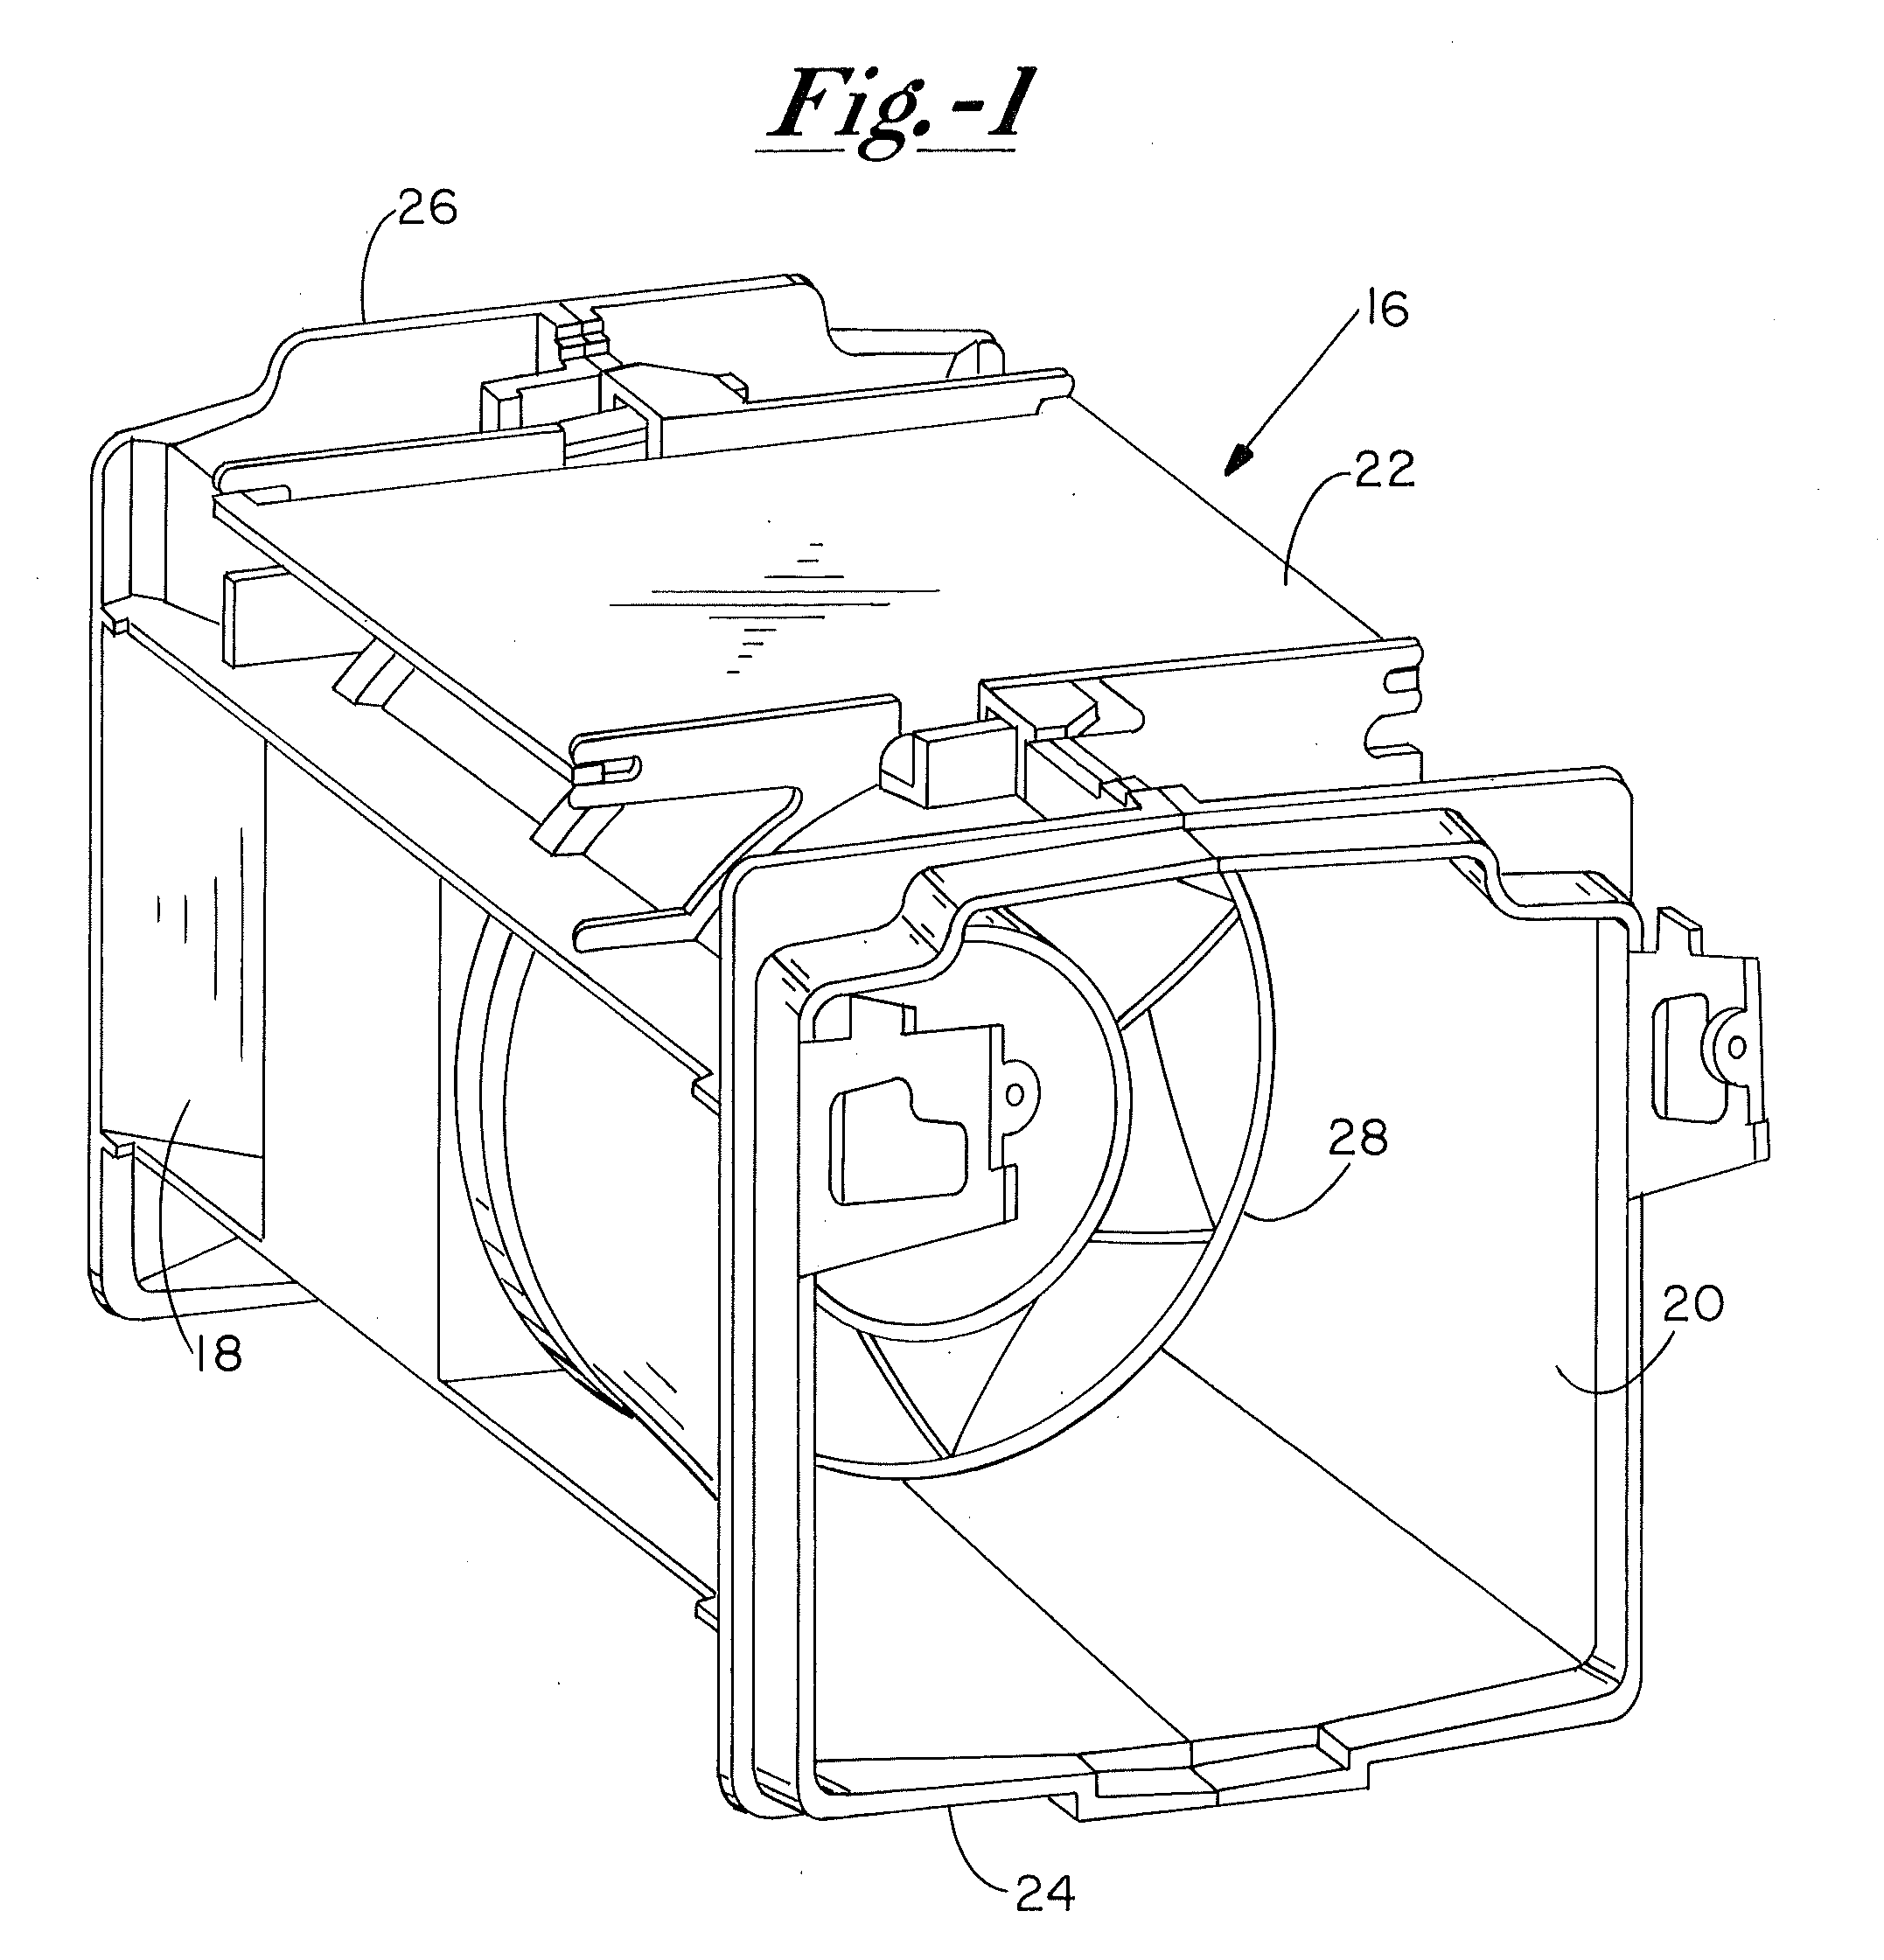 Device and Method for Mounting Electric Motor Stators